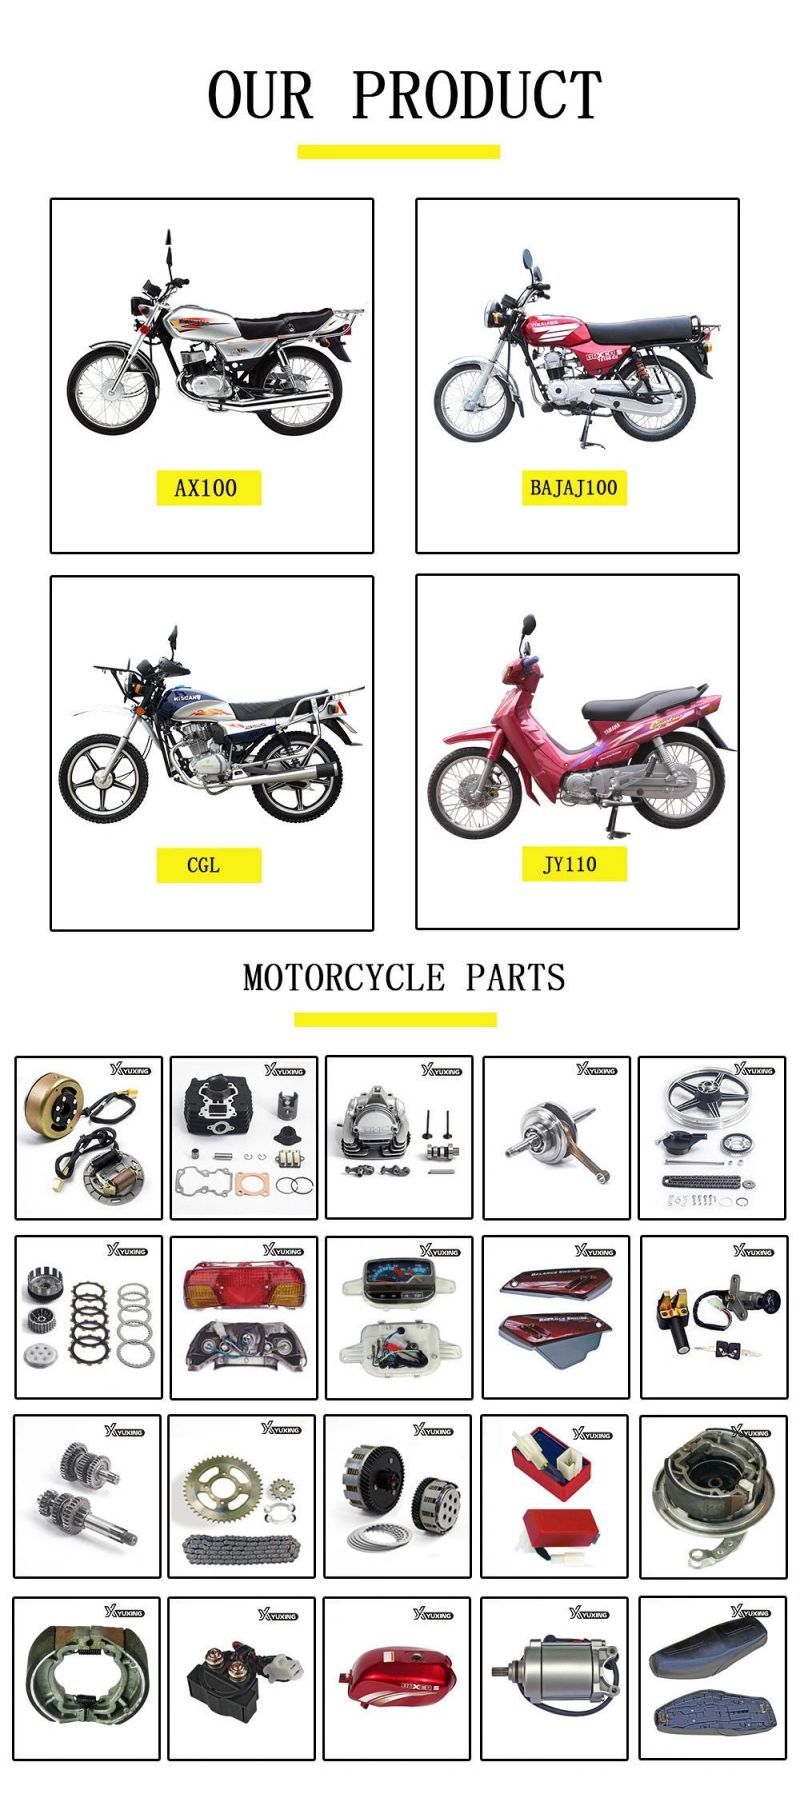 Yuxing Motorcycle Spare Parts Maintenance-Free Mf12V4 12V 4ah Motorcycle Battery for Motorbike